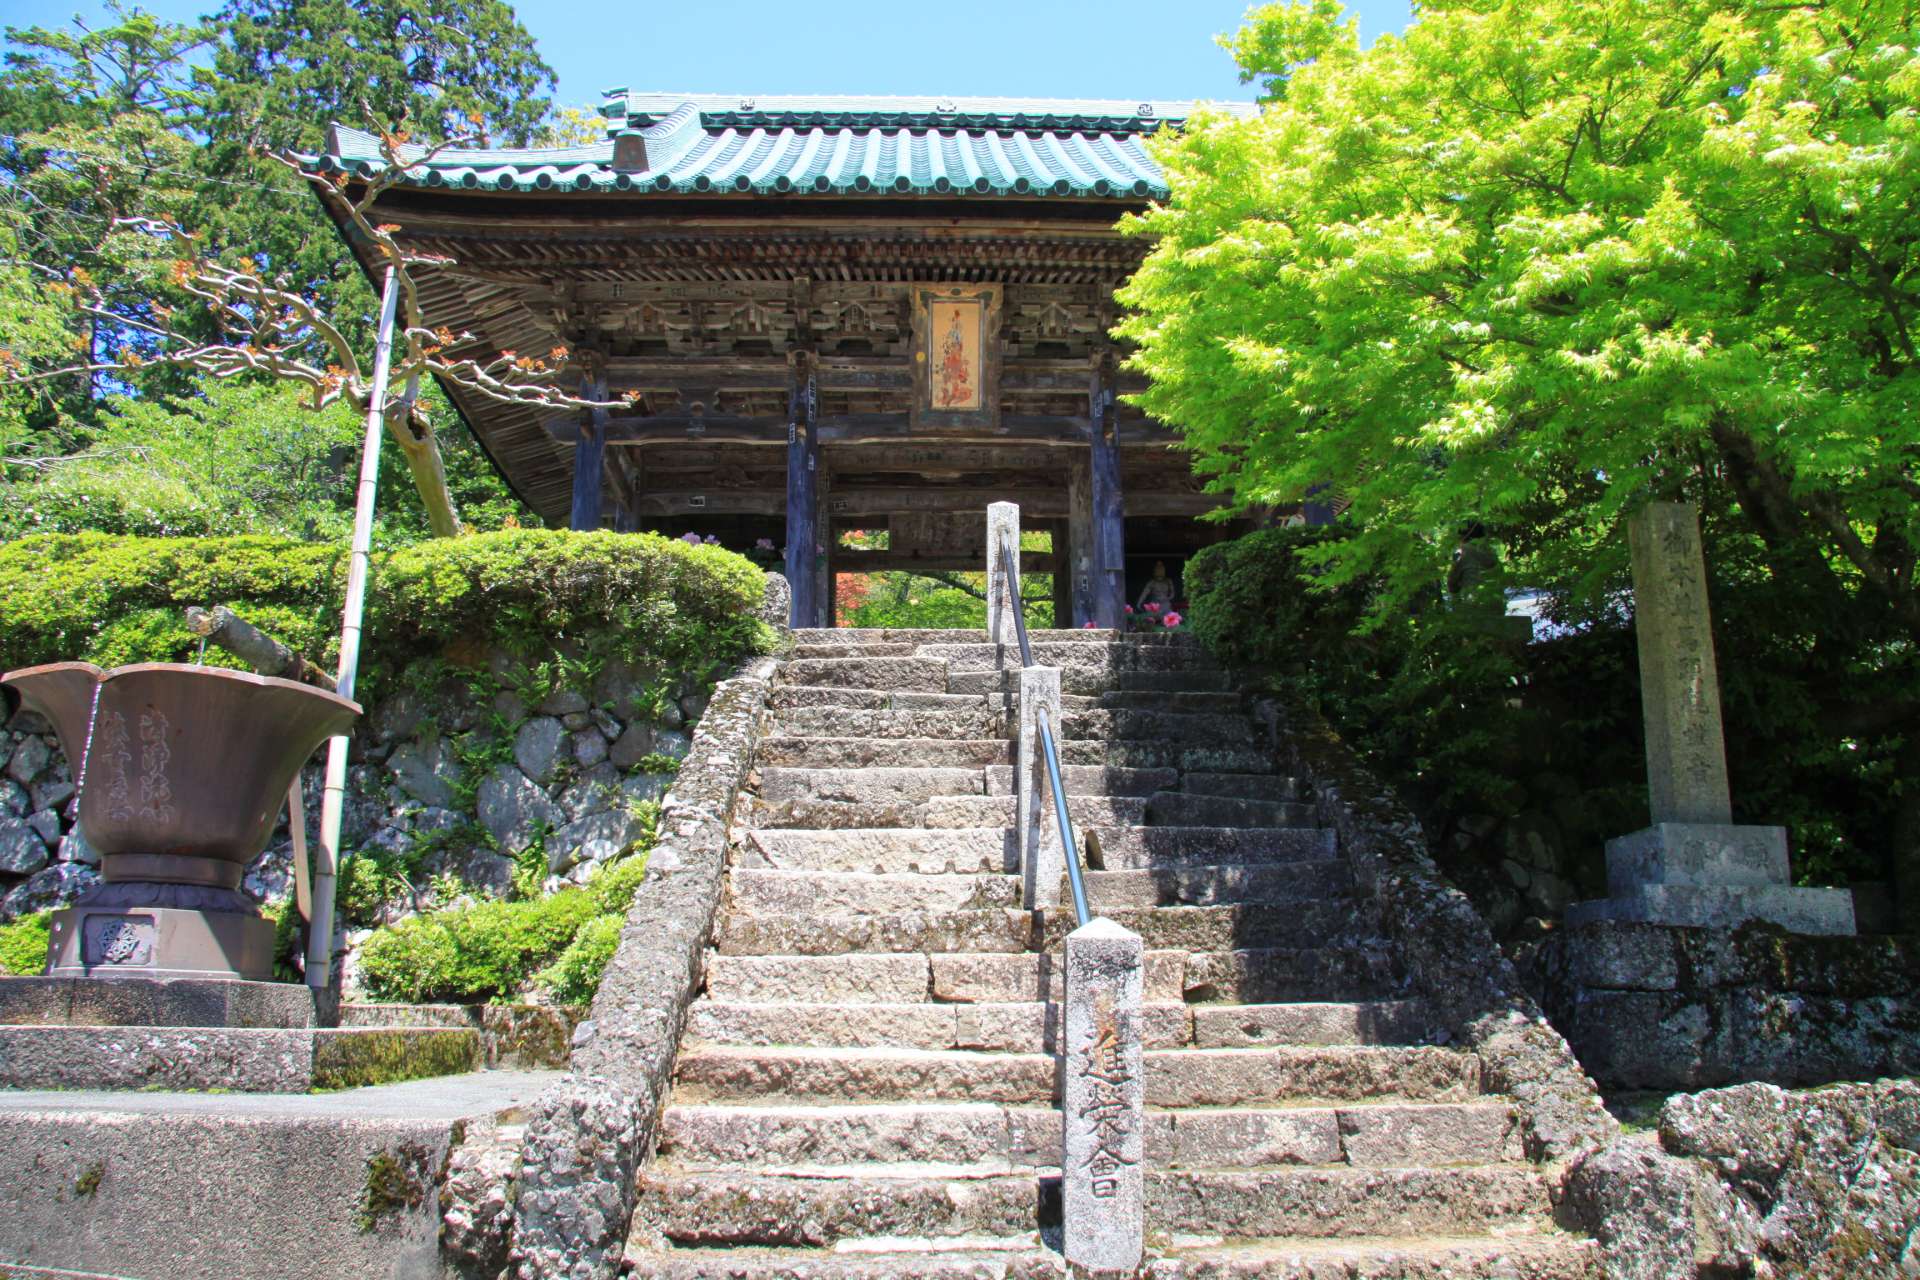 Matsunoo-dera Temple has been damaged by severe fires many times. The stately Nio-mon guardian gate was built during the mid-Edo Period in 1767.